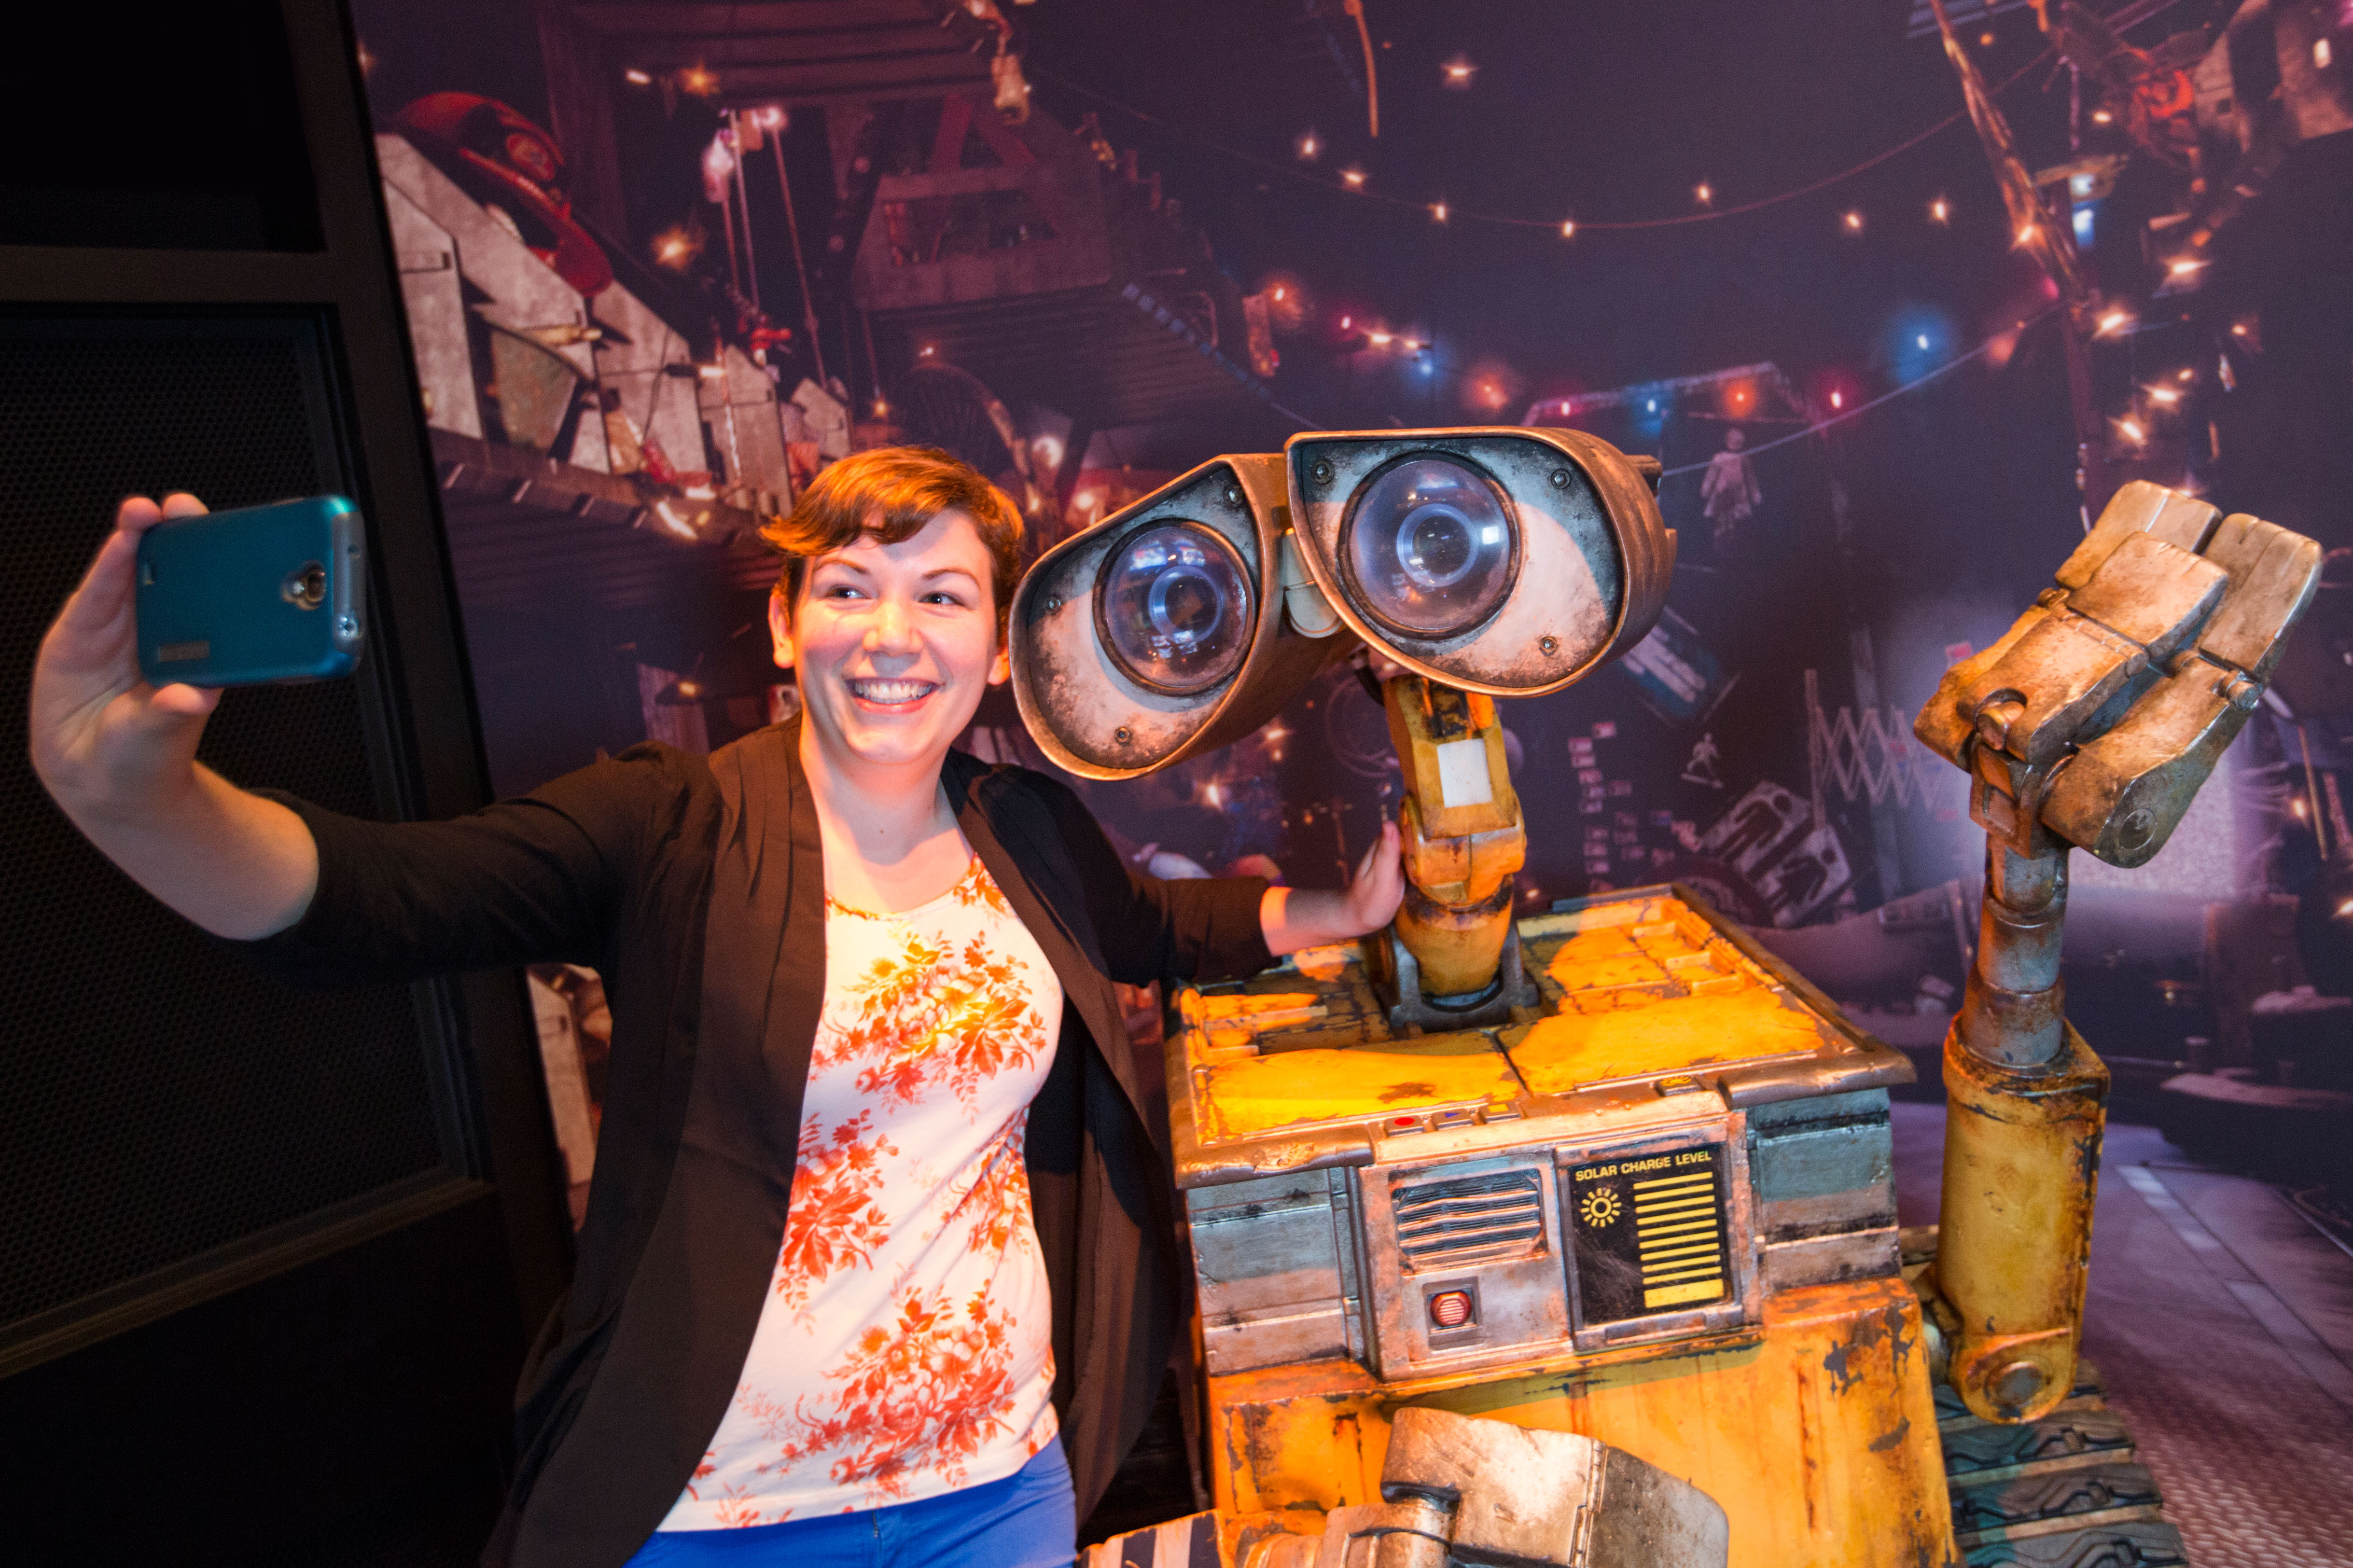 Learn how cameras tell a story while taking a selfie with WALL•E.